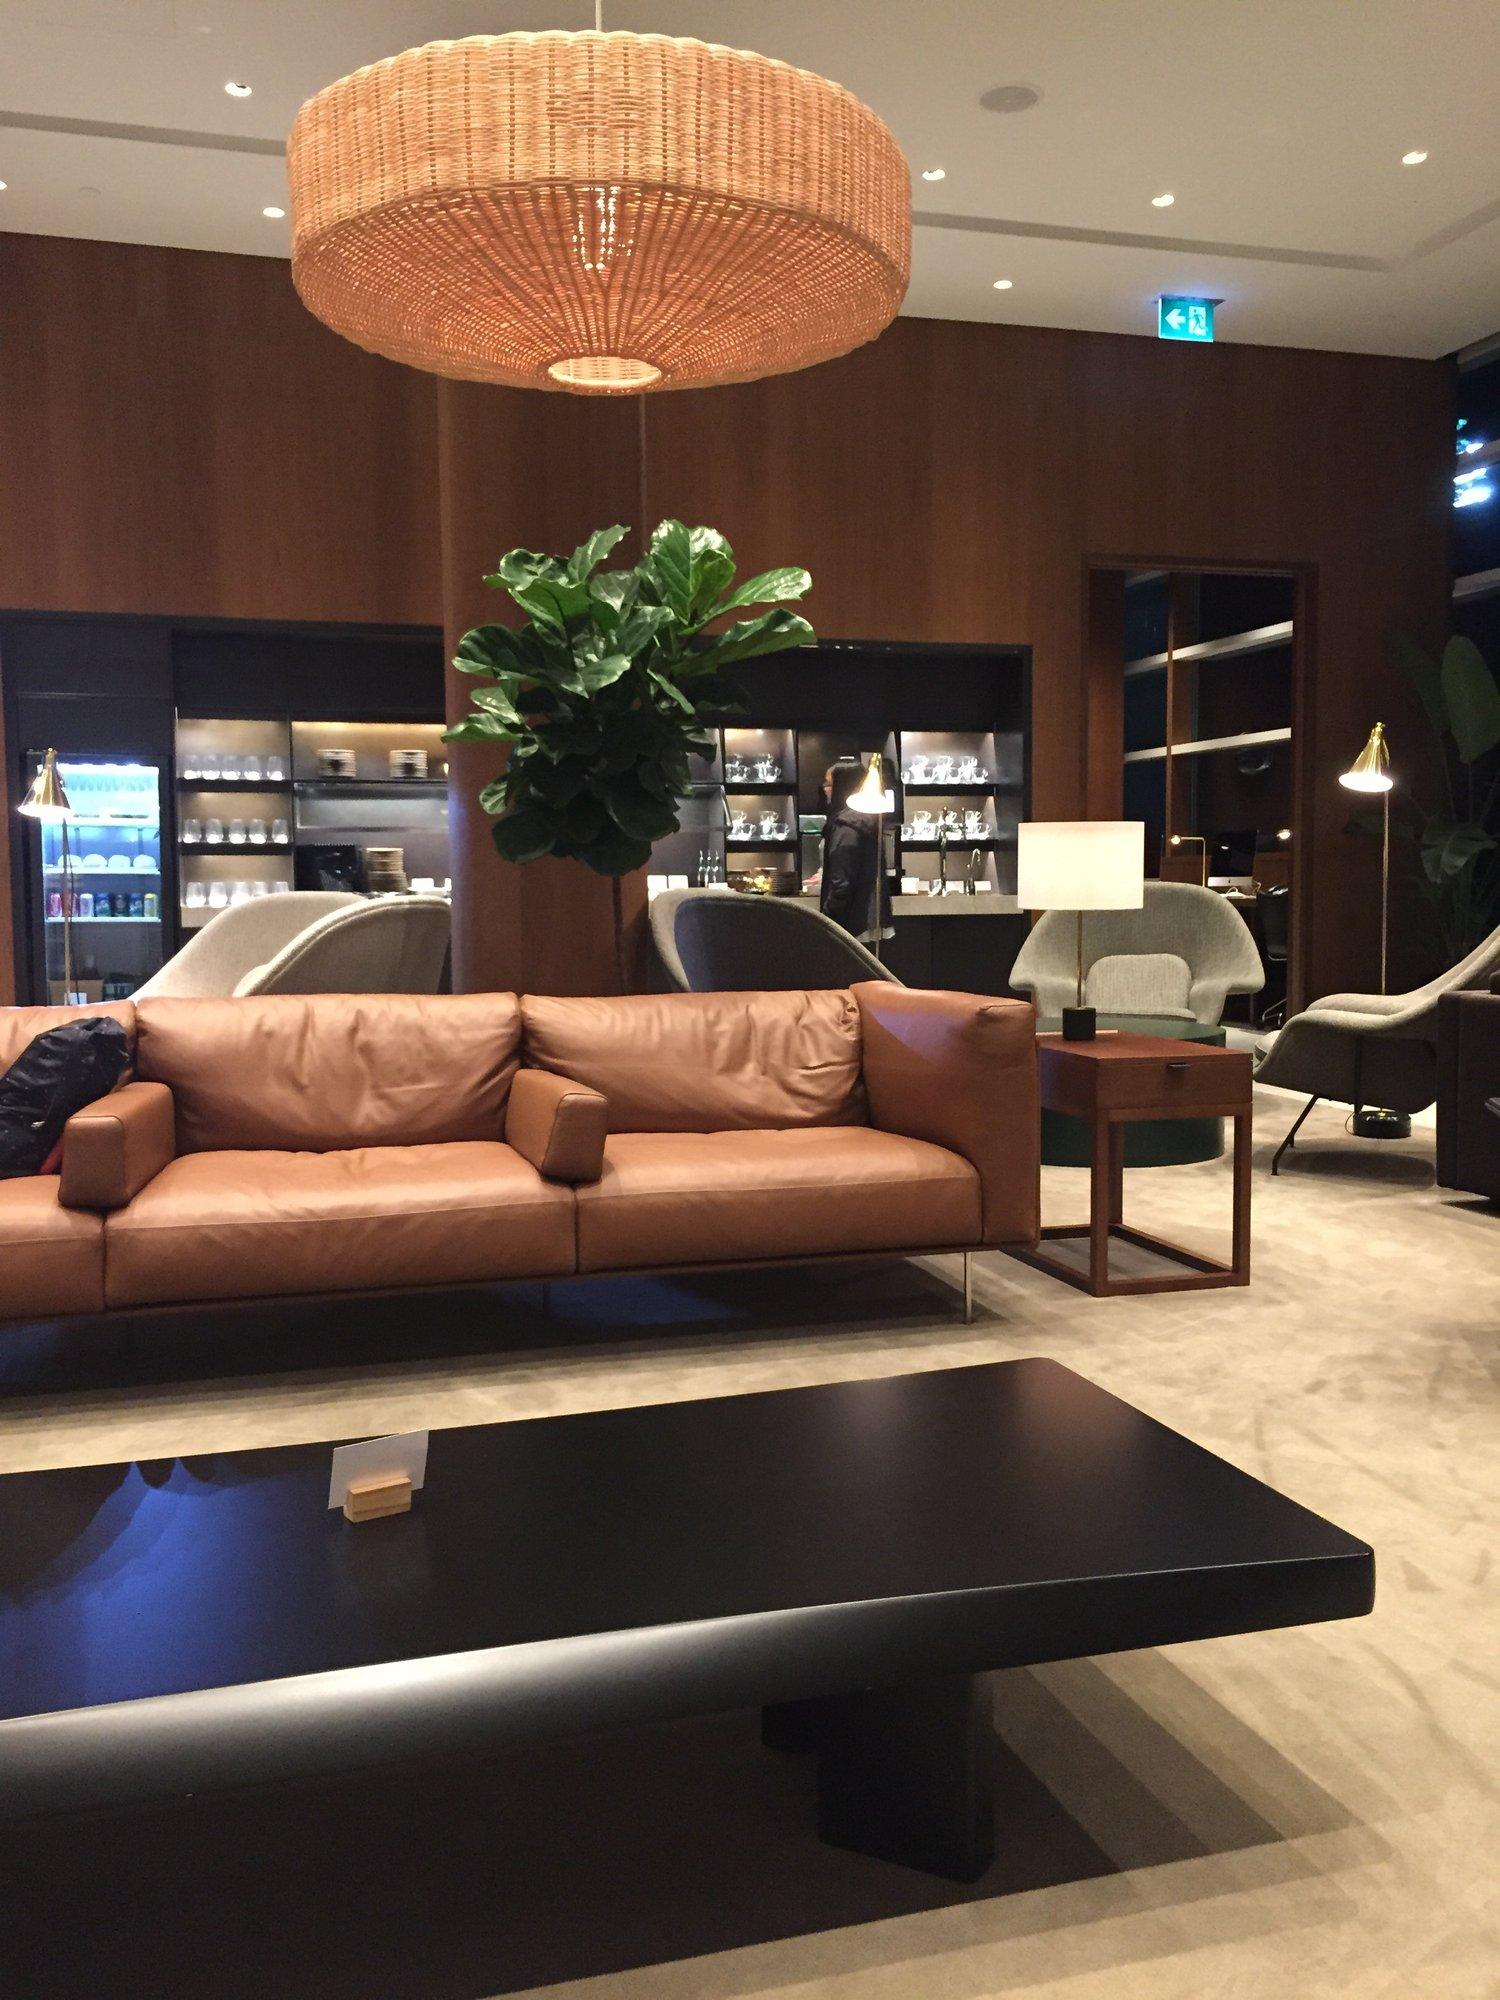 Cathay Pacific First and Business Class Lounge image 9 of 11